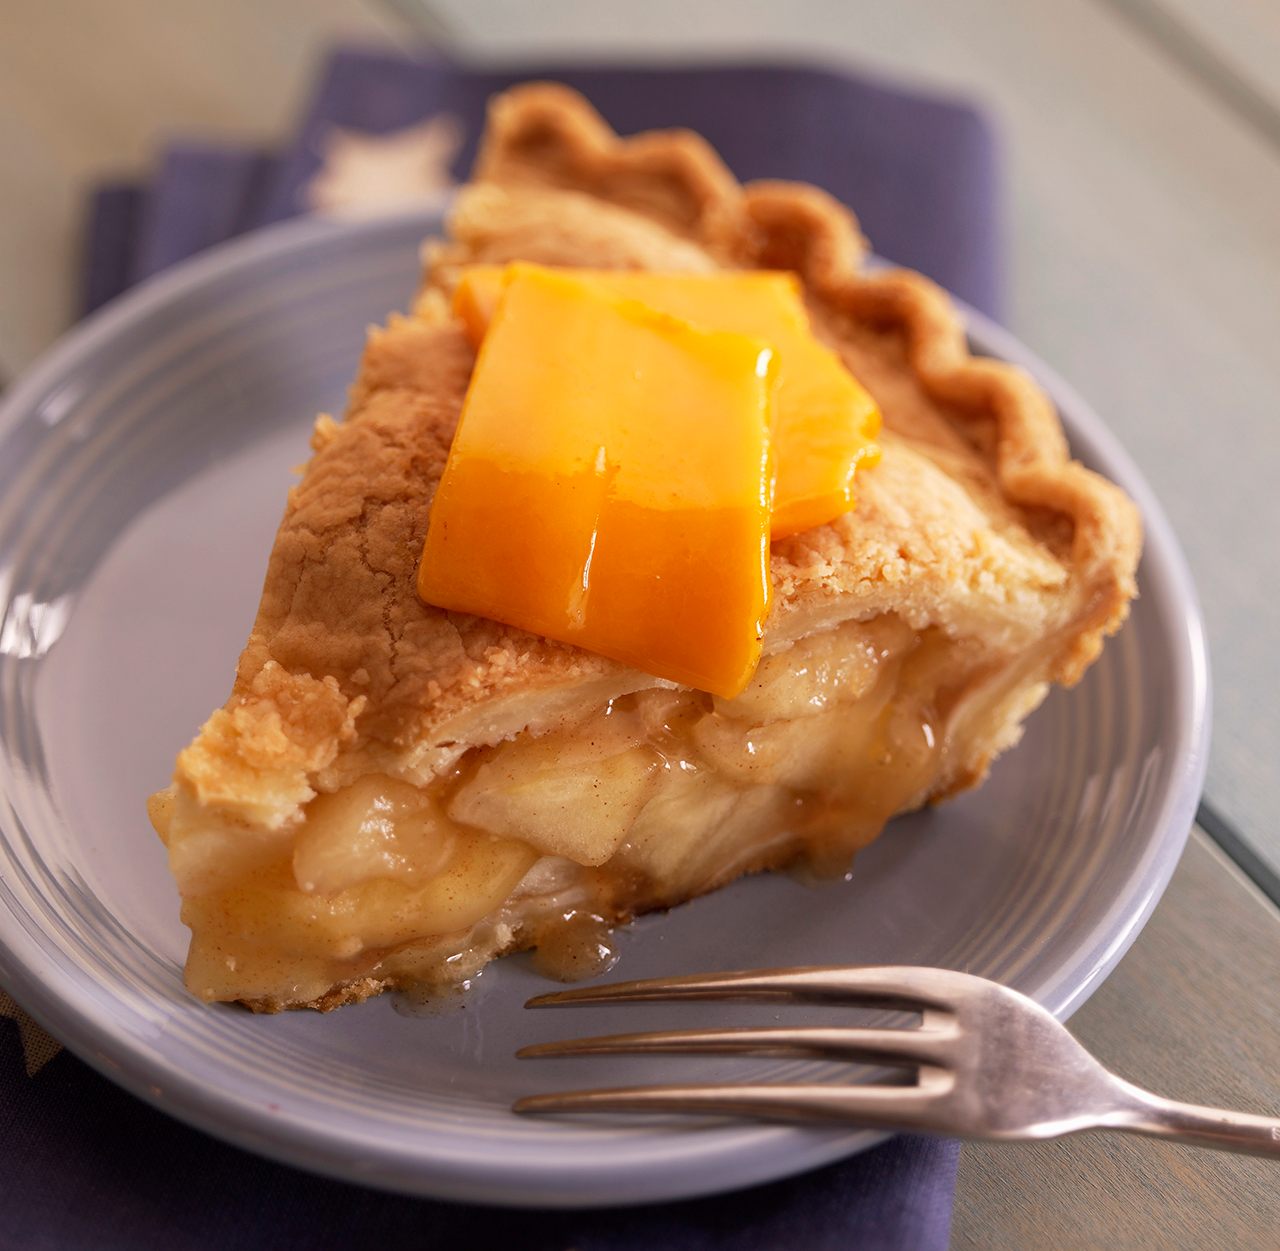 Cheddar cheese on apple pie (one of the less complex variants).